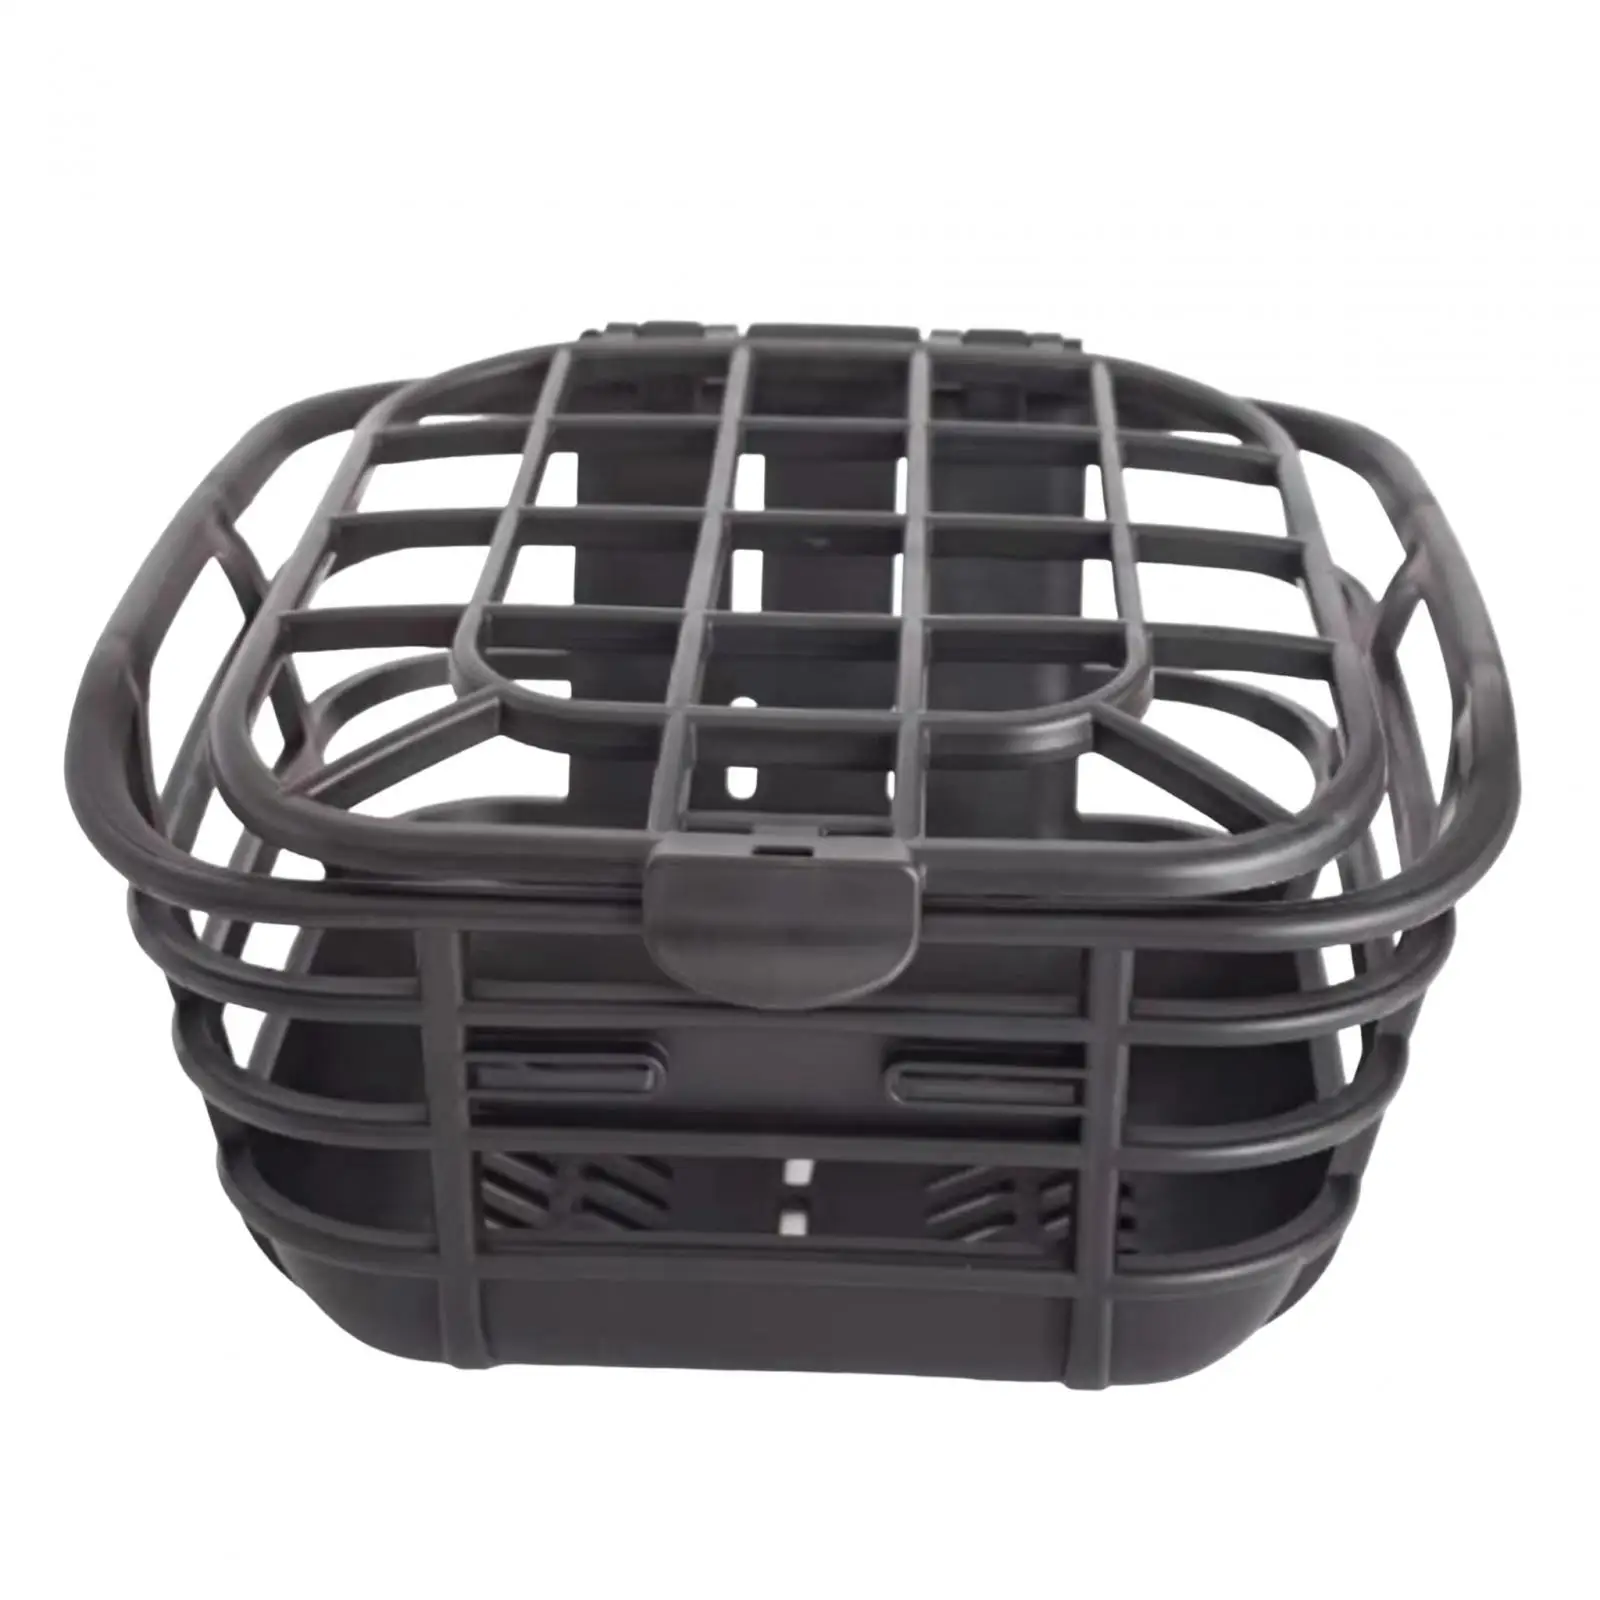 Front Bike Basket Easy to Install Pet Carrier Bike Handlebar Basket with Cover for Kids Bikes Road Bikes Electric Bikes Riding